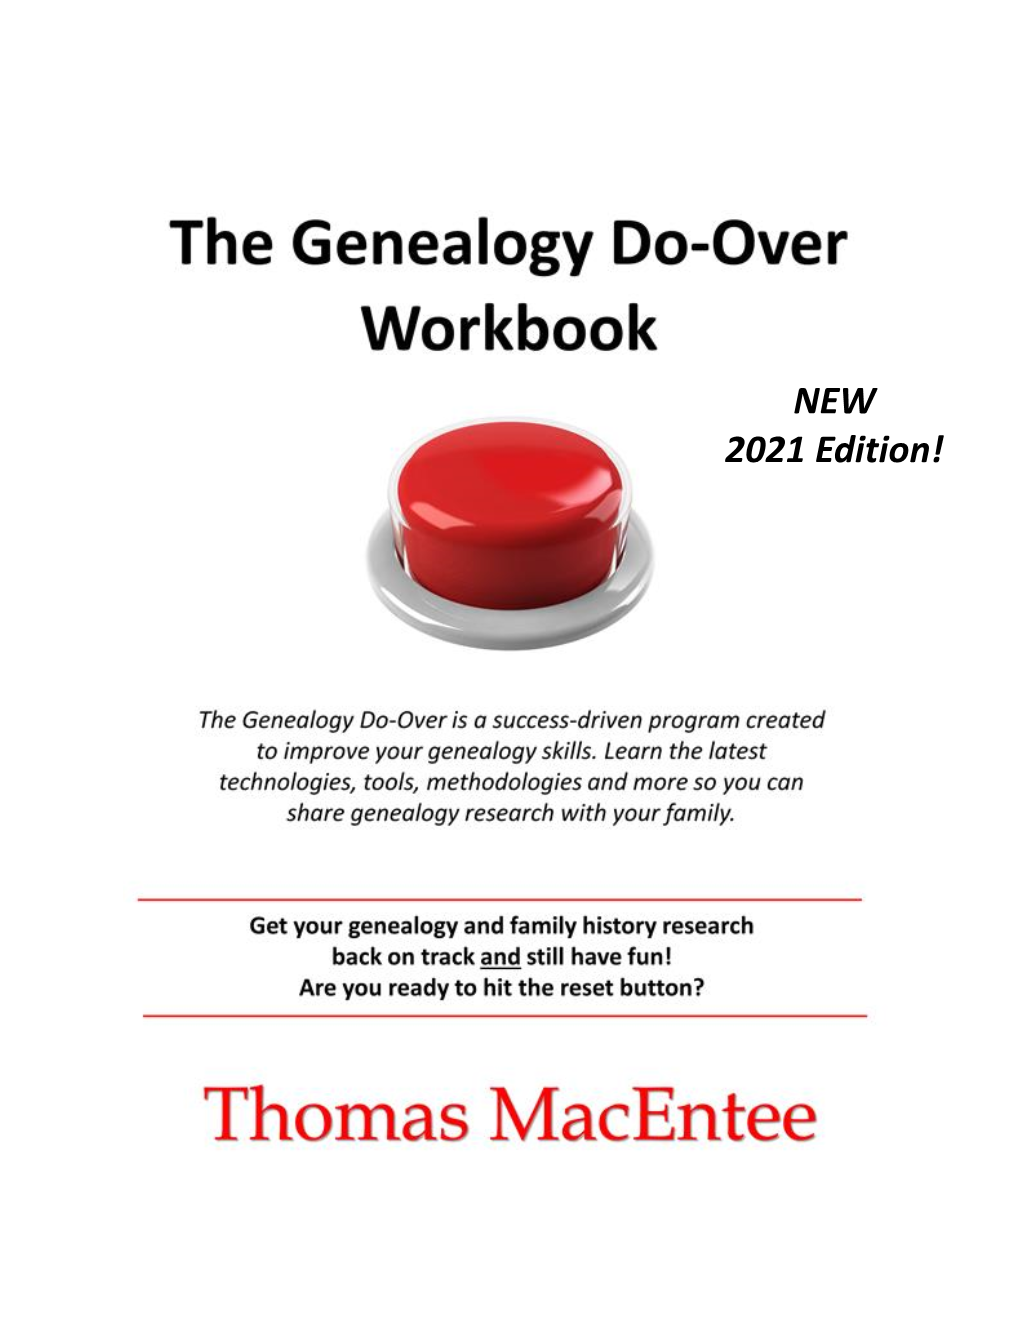 The Genealogy Do-Over Workbook 2021 Edition